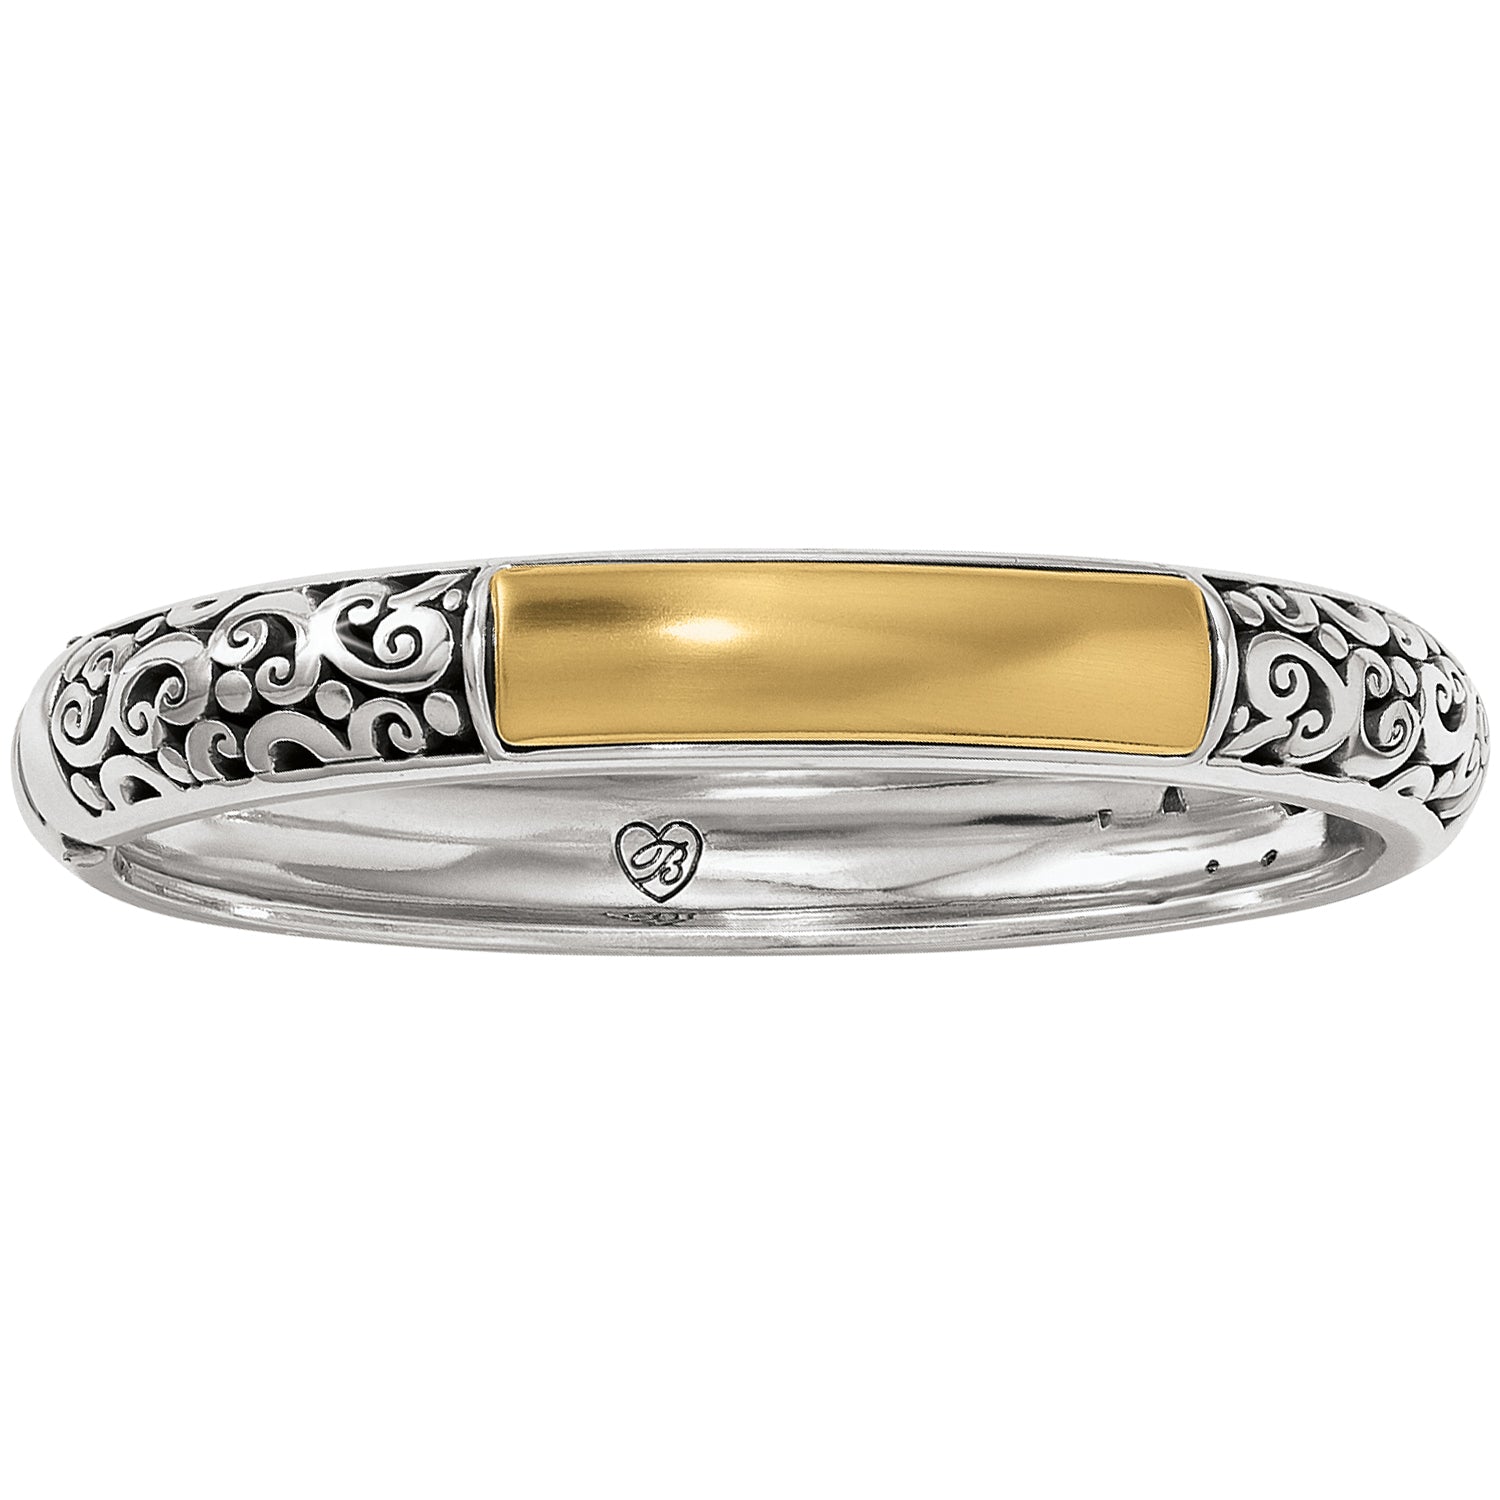 Catania Hinged Bangle Bracelet Front View